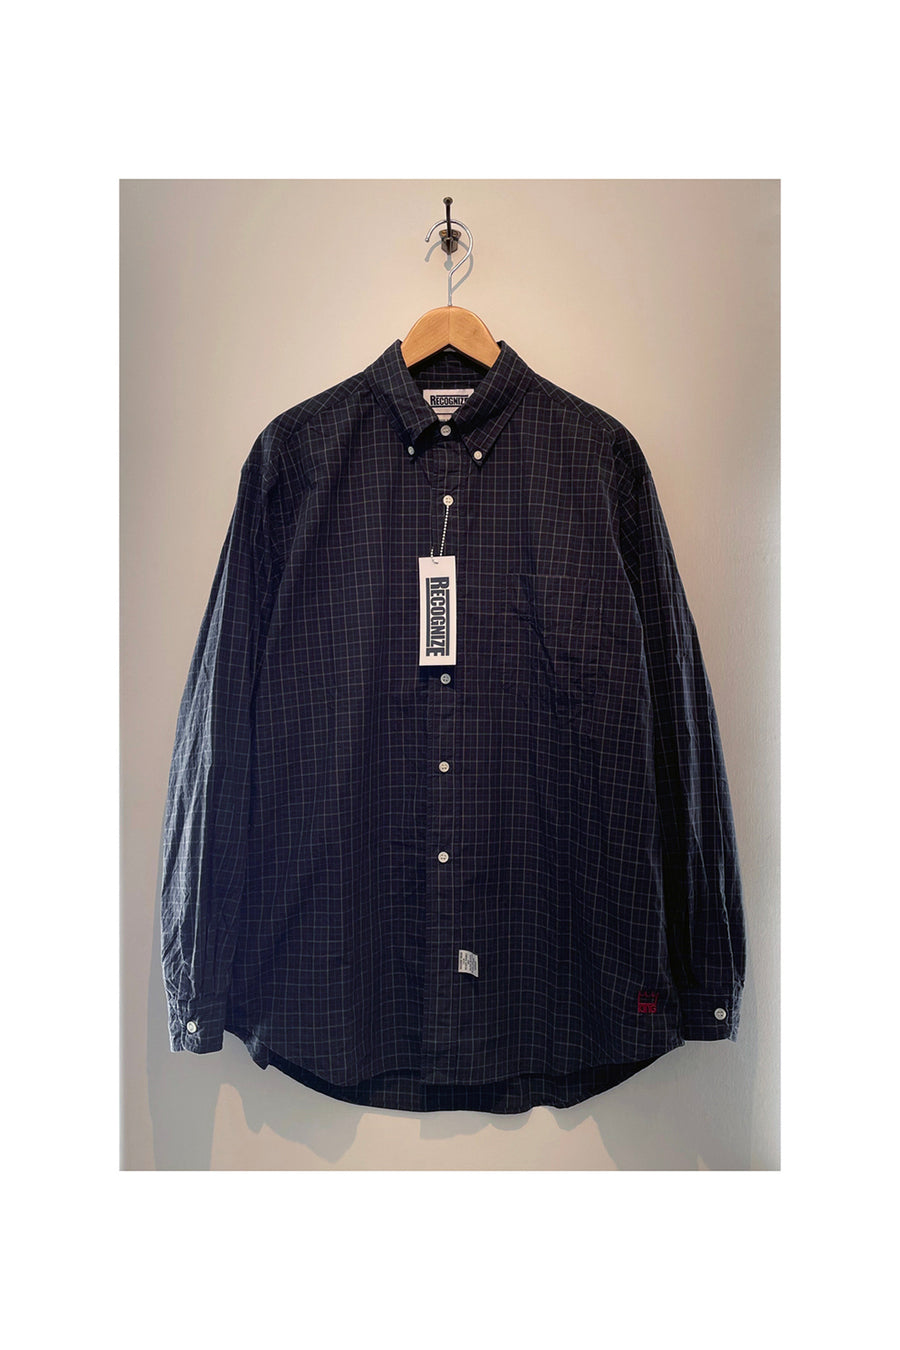 〈RECOGNIZE〉HIGH COUNT B.D. CHECK SHIRTS